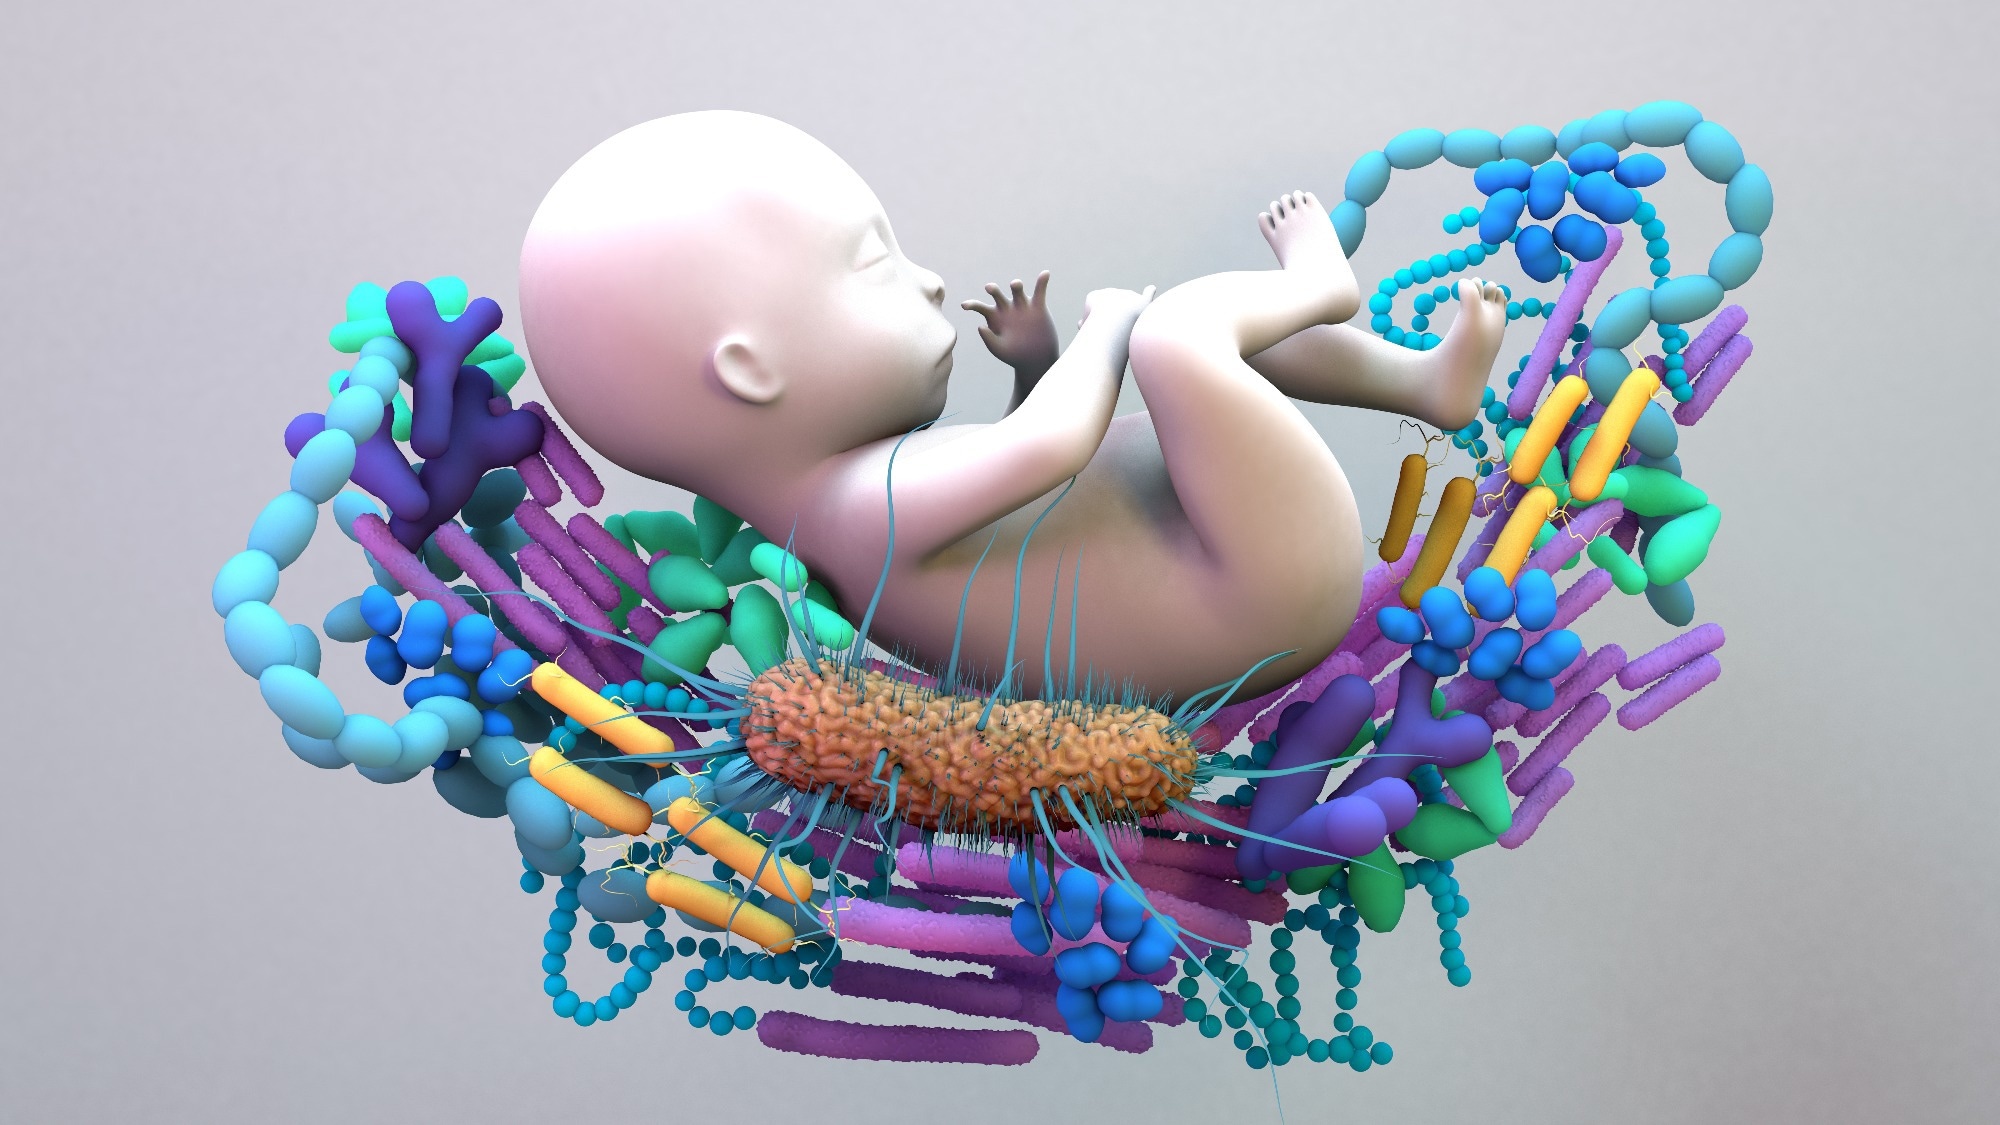 How does maternal diet impact the microbiomes of infants and breast milk?